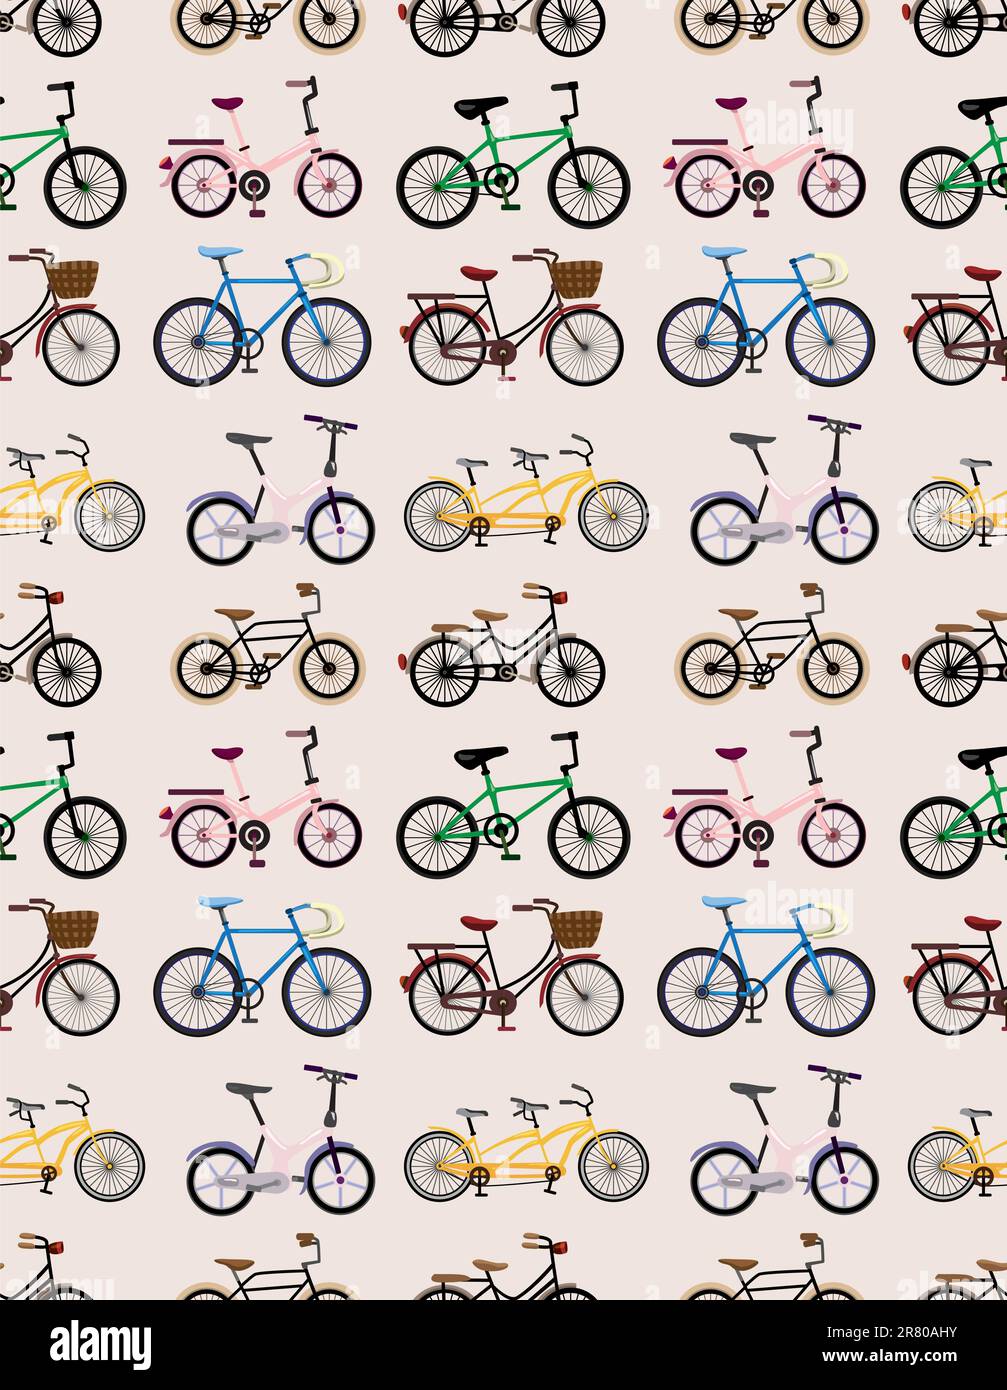 seamless bicycle pattern Stock Vector